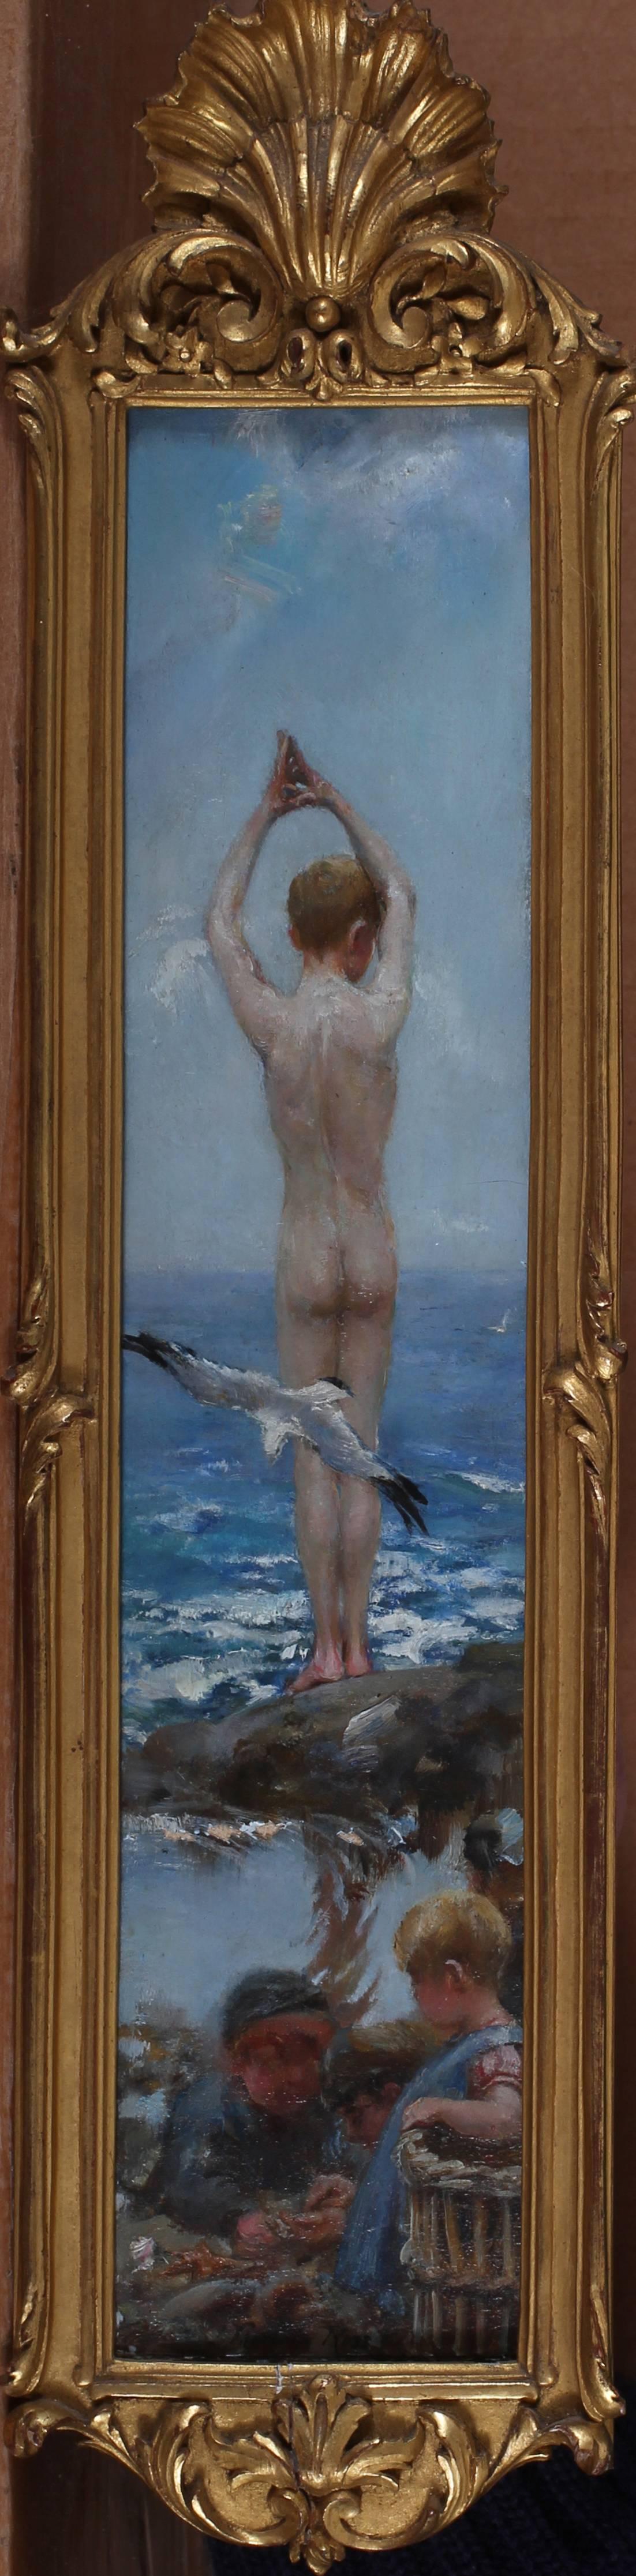 The Diver - Painting by Joseph Thorburn Ross